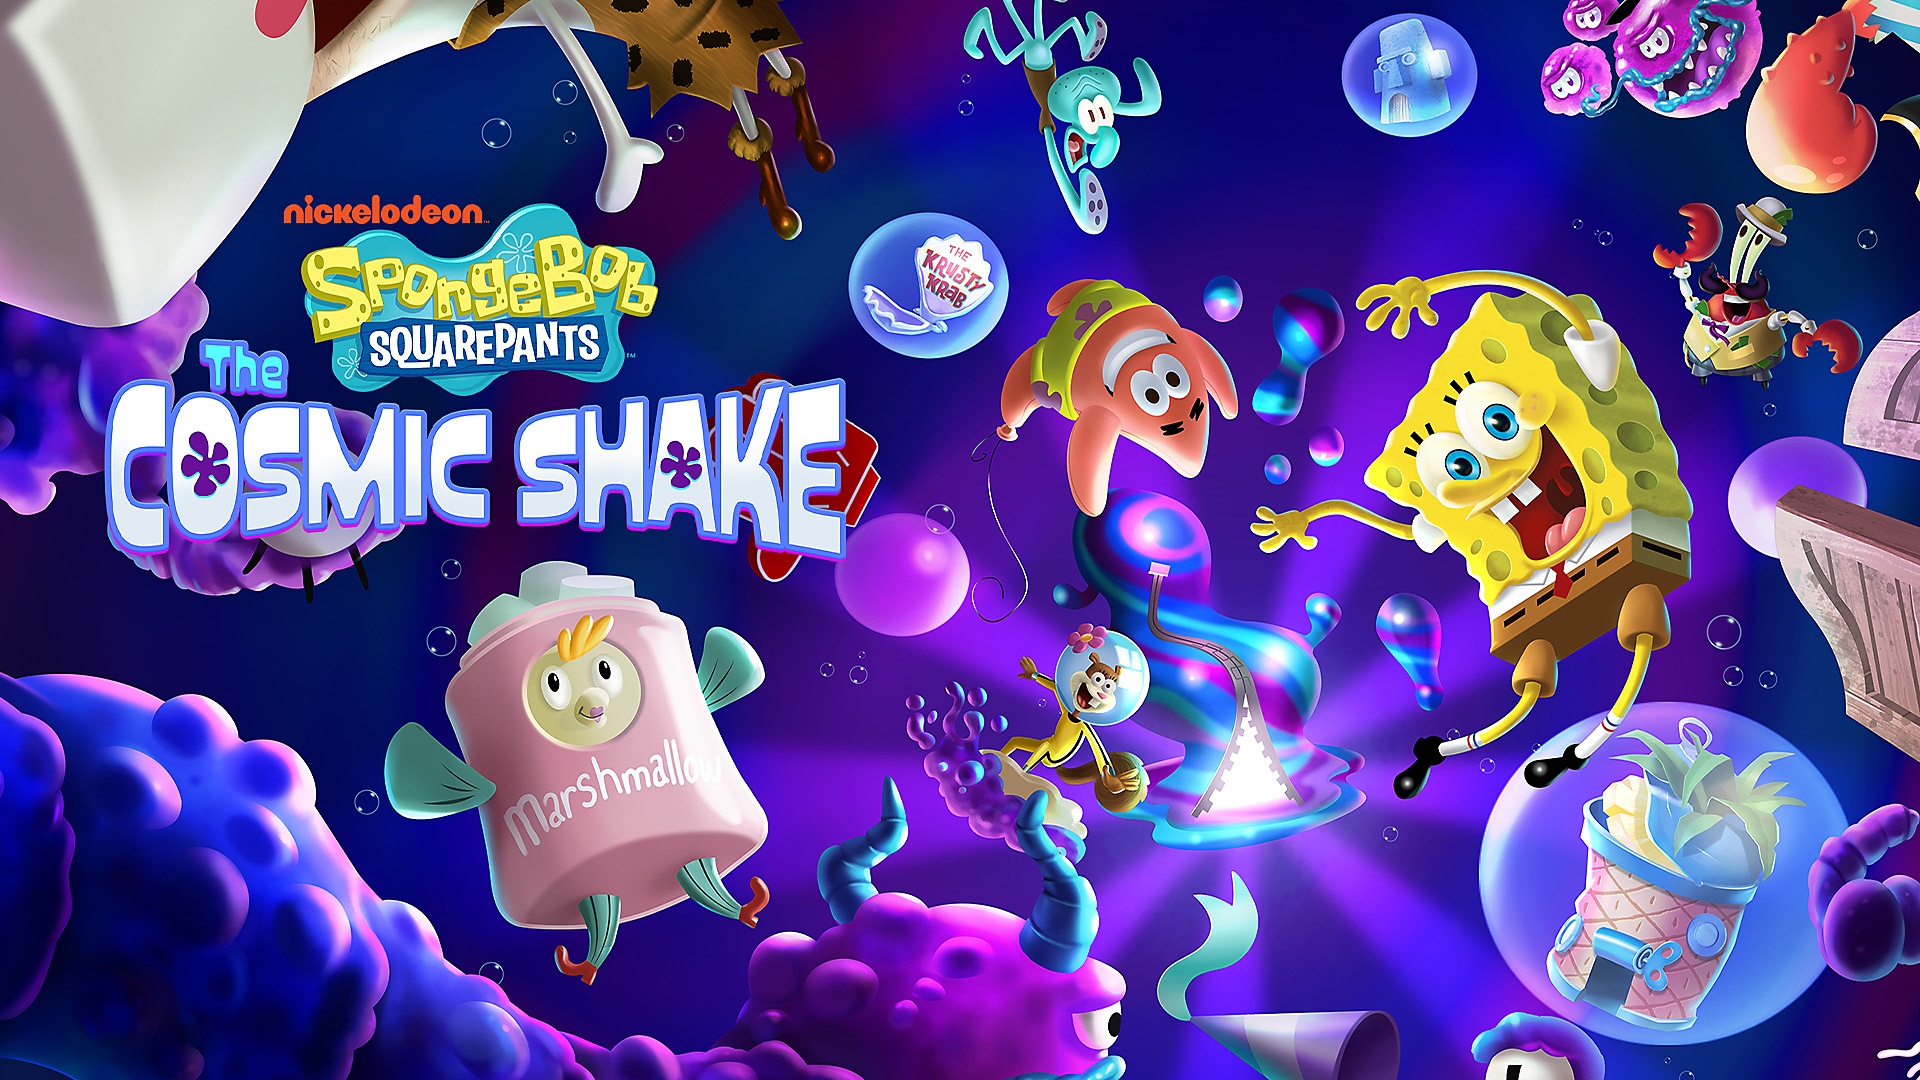 SpongeBob, Patrick and other characters floating in underwater cosmos for SpongeBob SquarePants: The Cosmic Shake on PS4, PS5